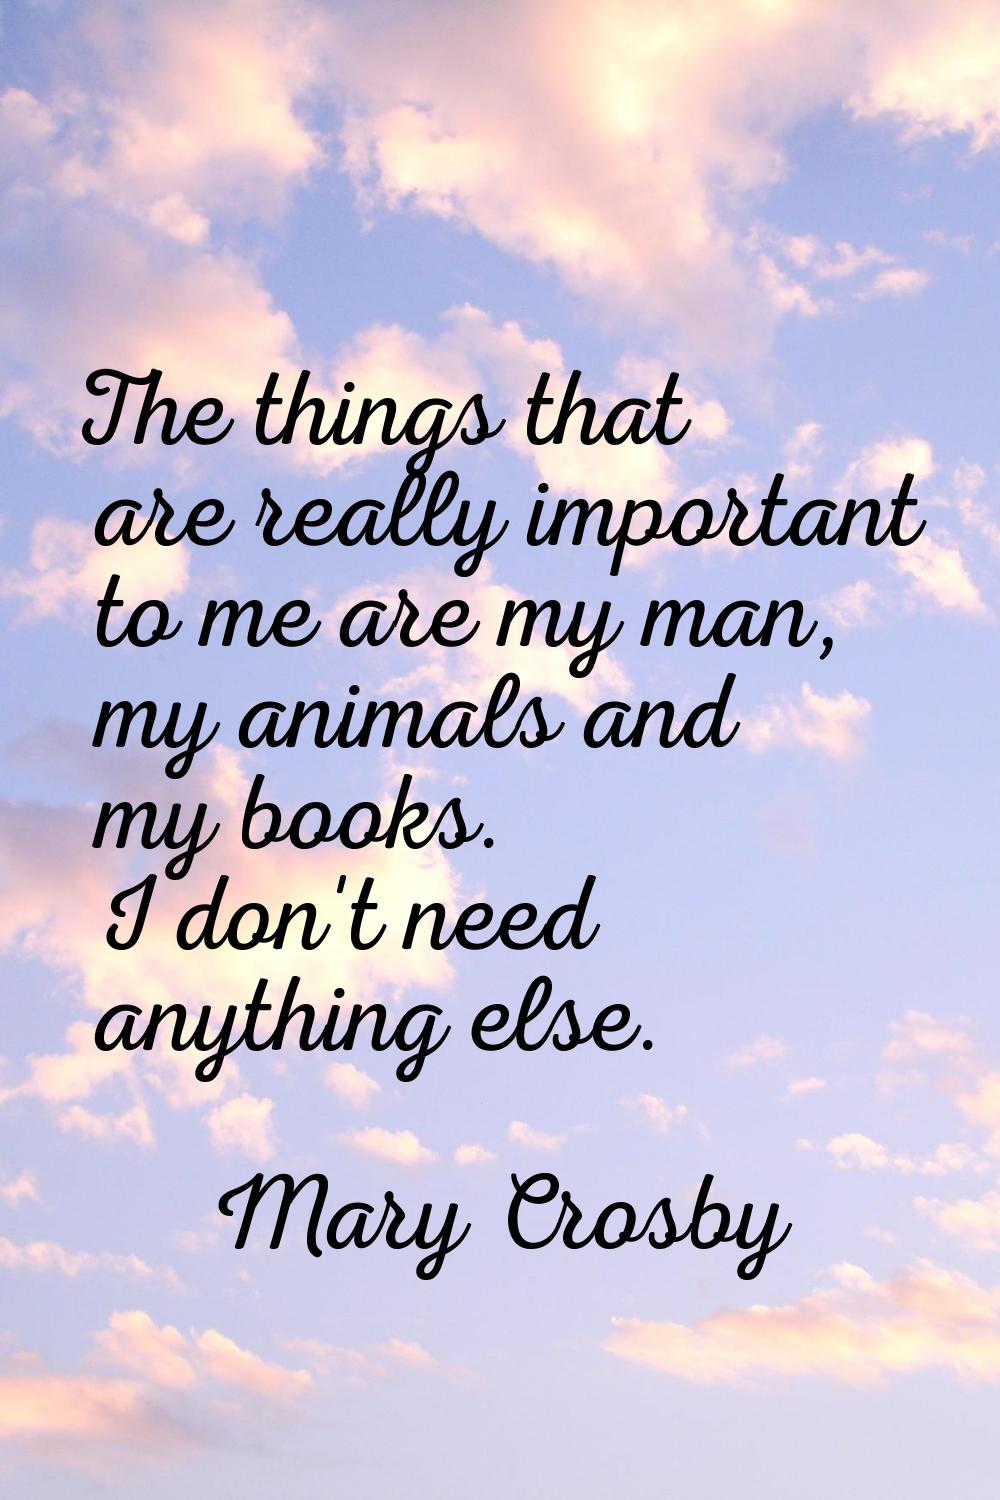 The things that are really important to me are my man, my animals and my books. I don't need anythi